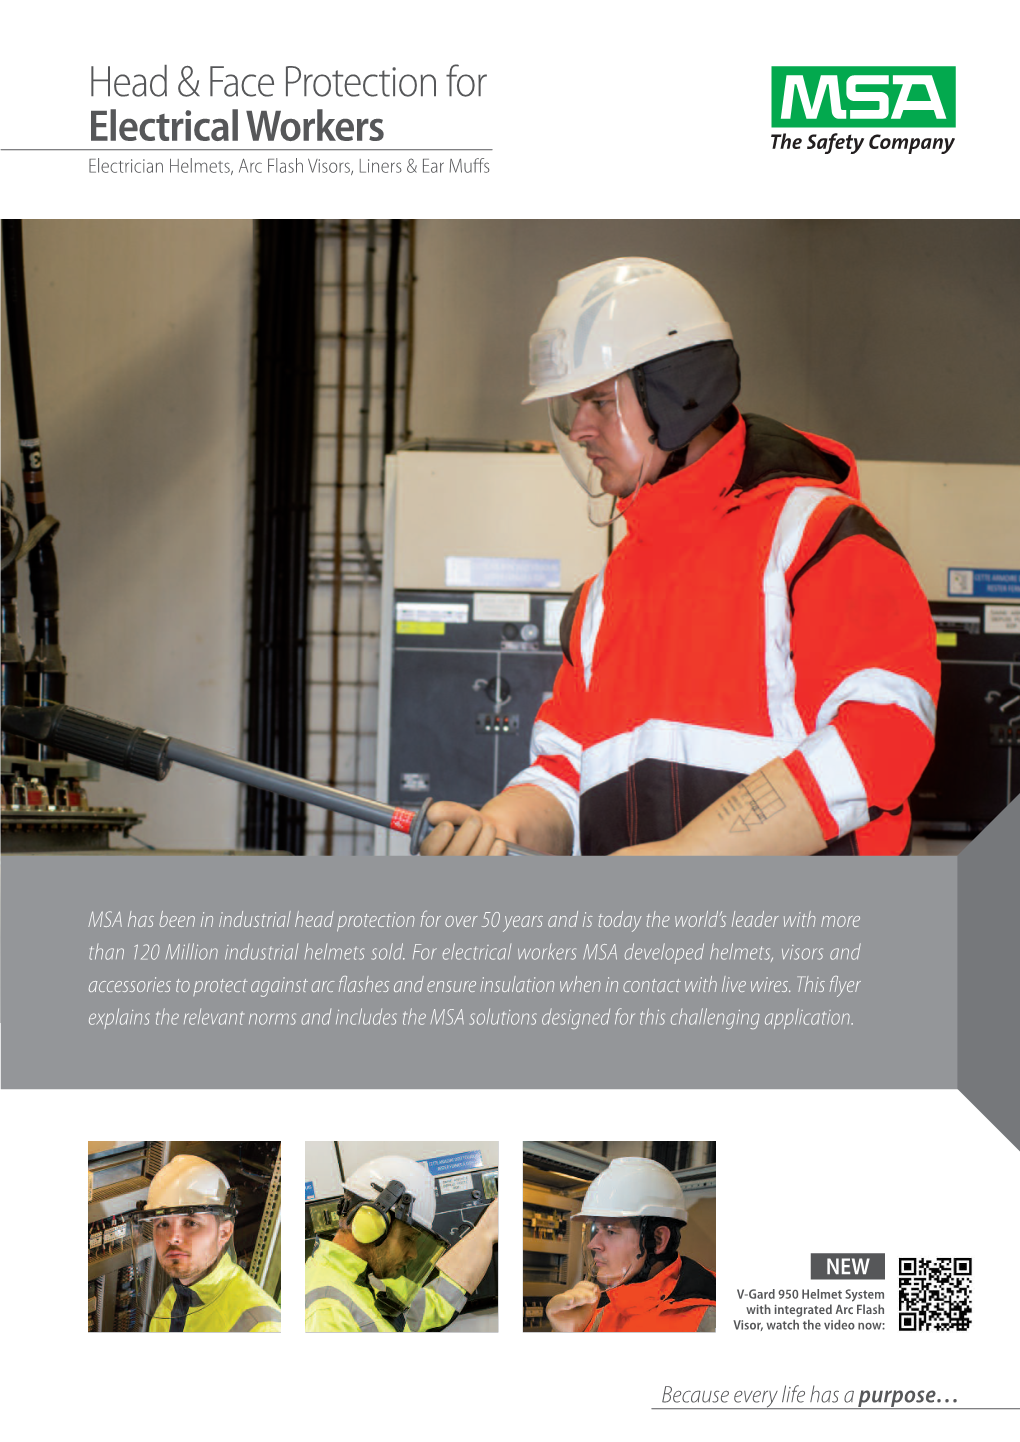 MSA Head & Face Protection for Electrical Workers